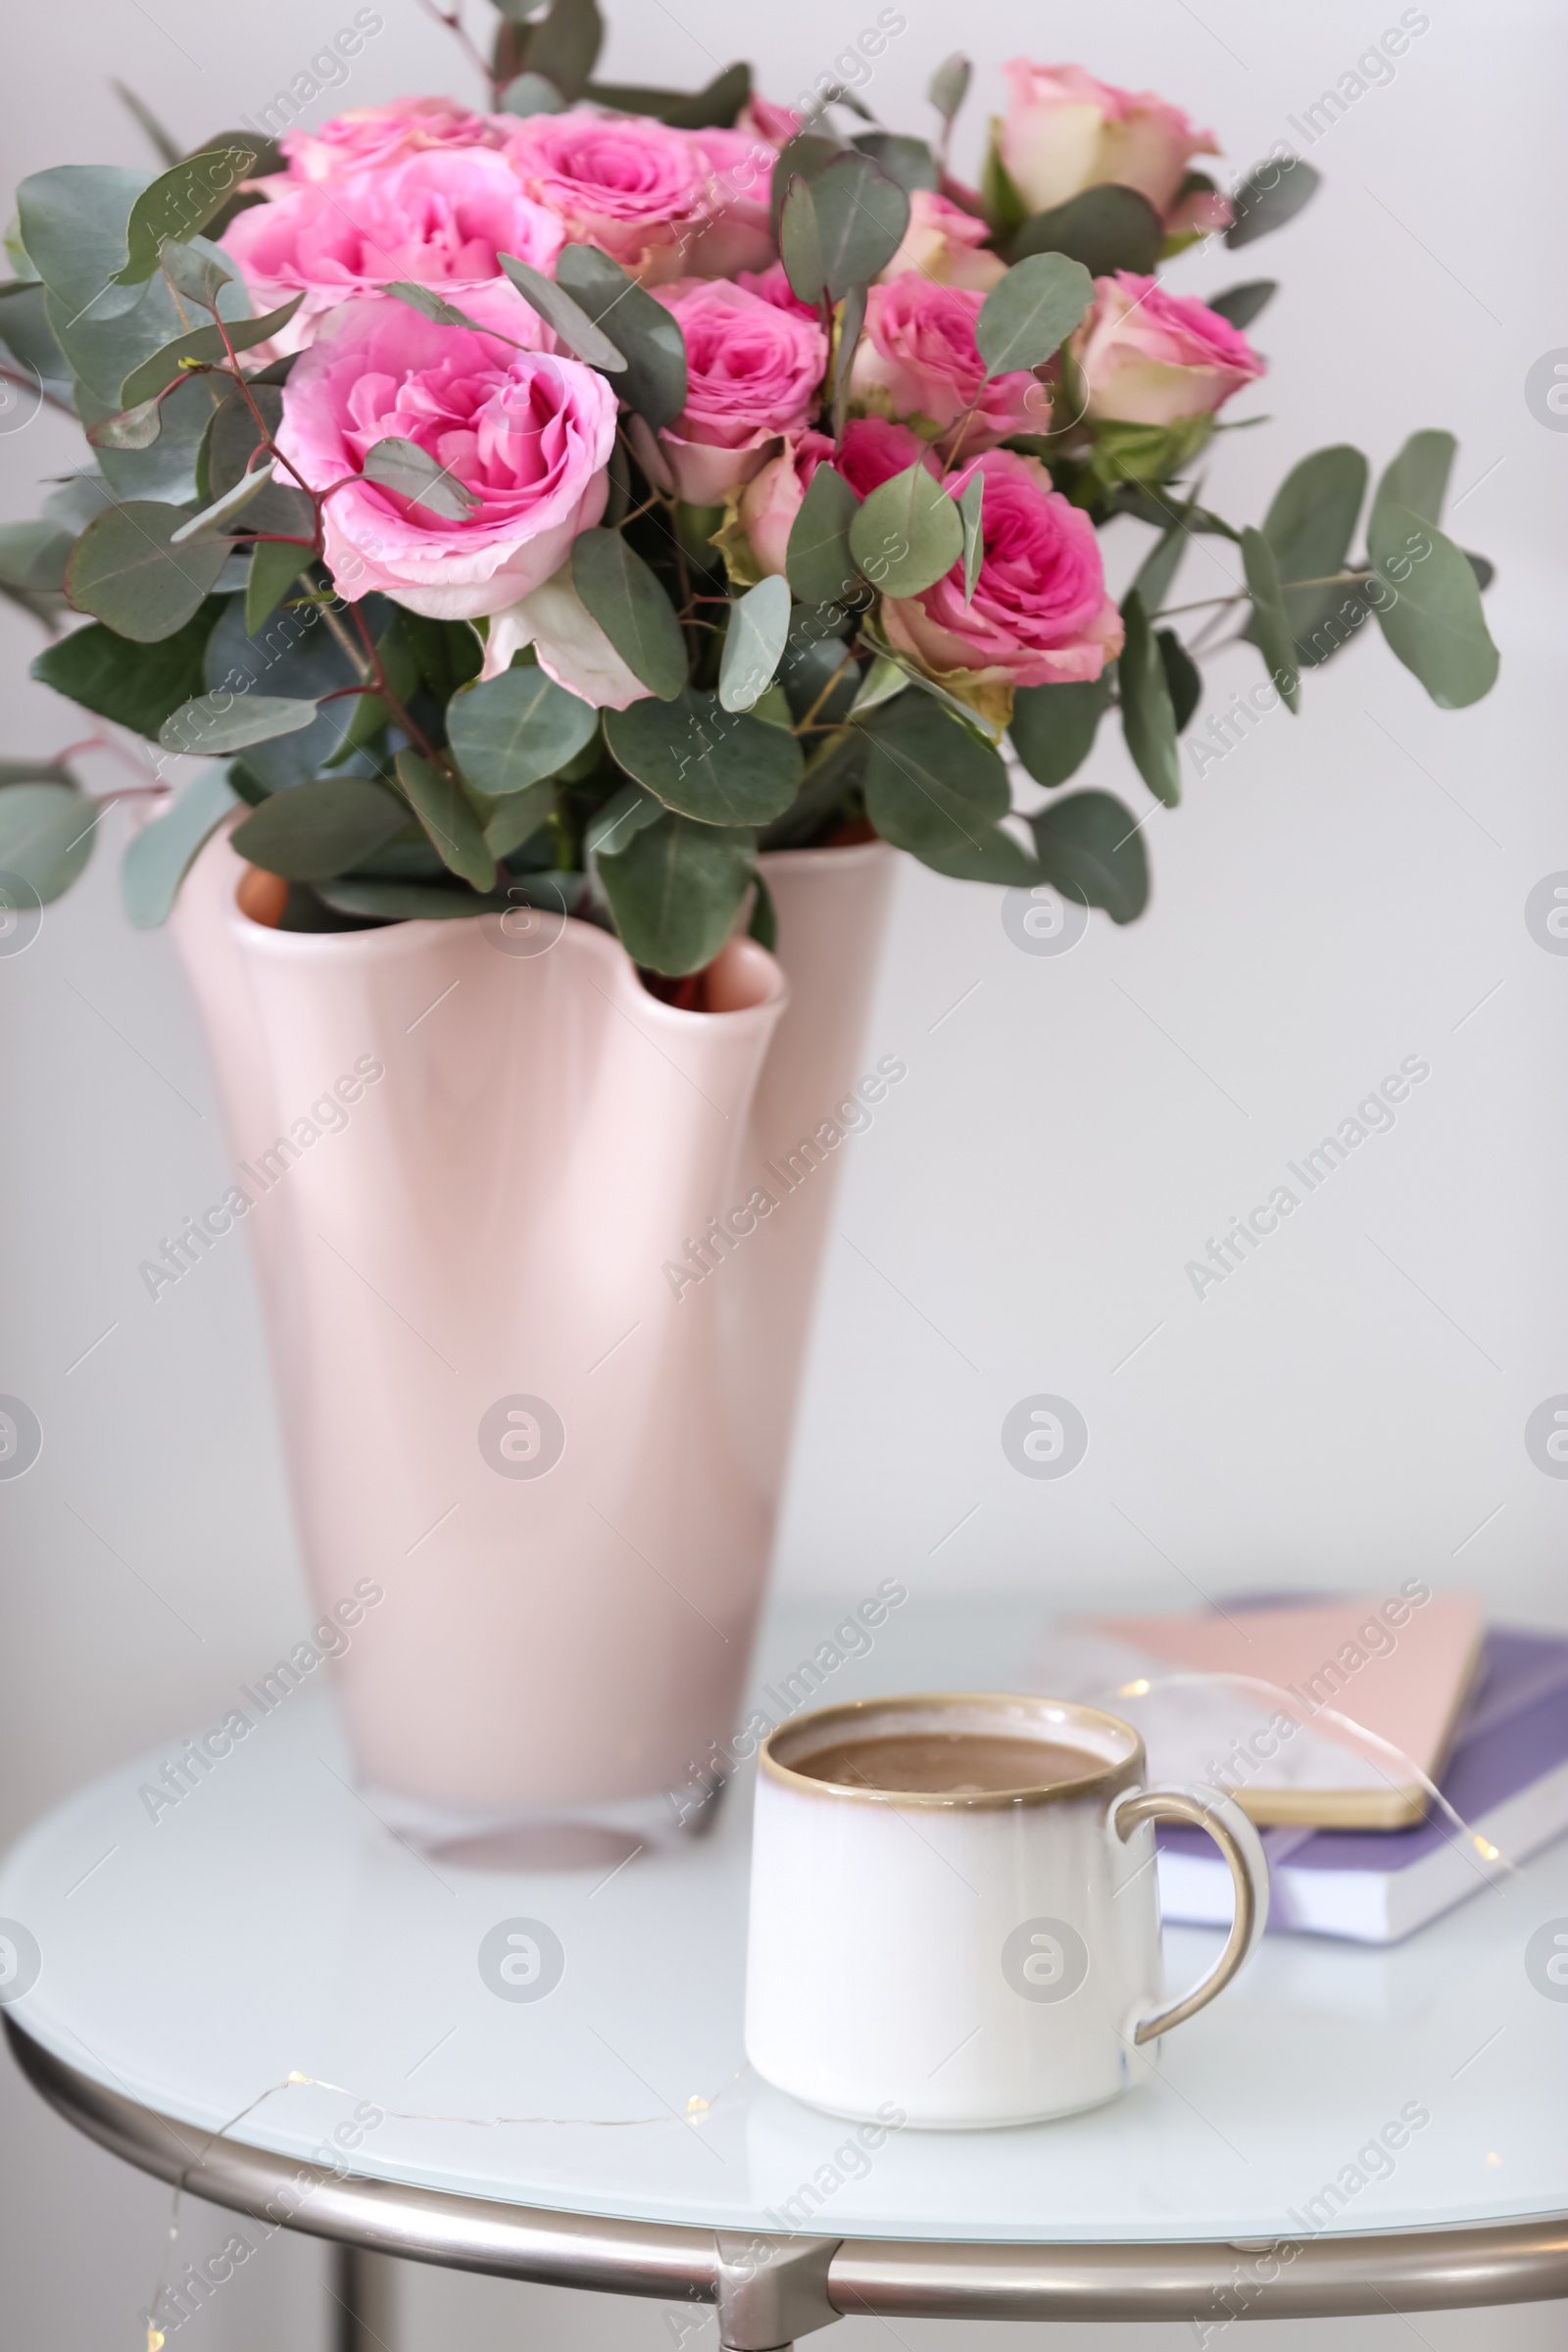 Photo of Cup of coffee and flowers on table